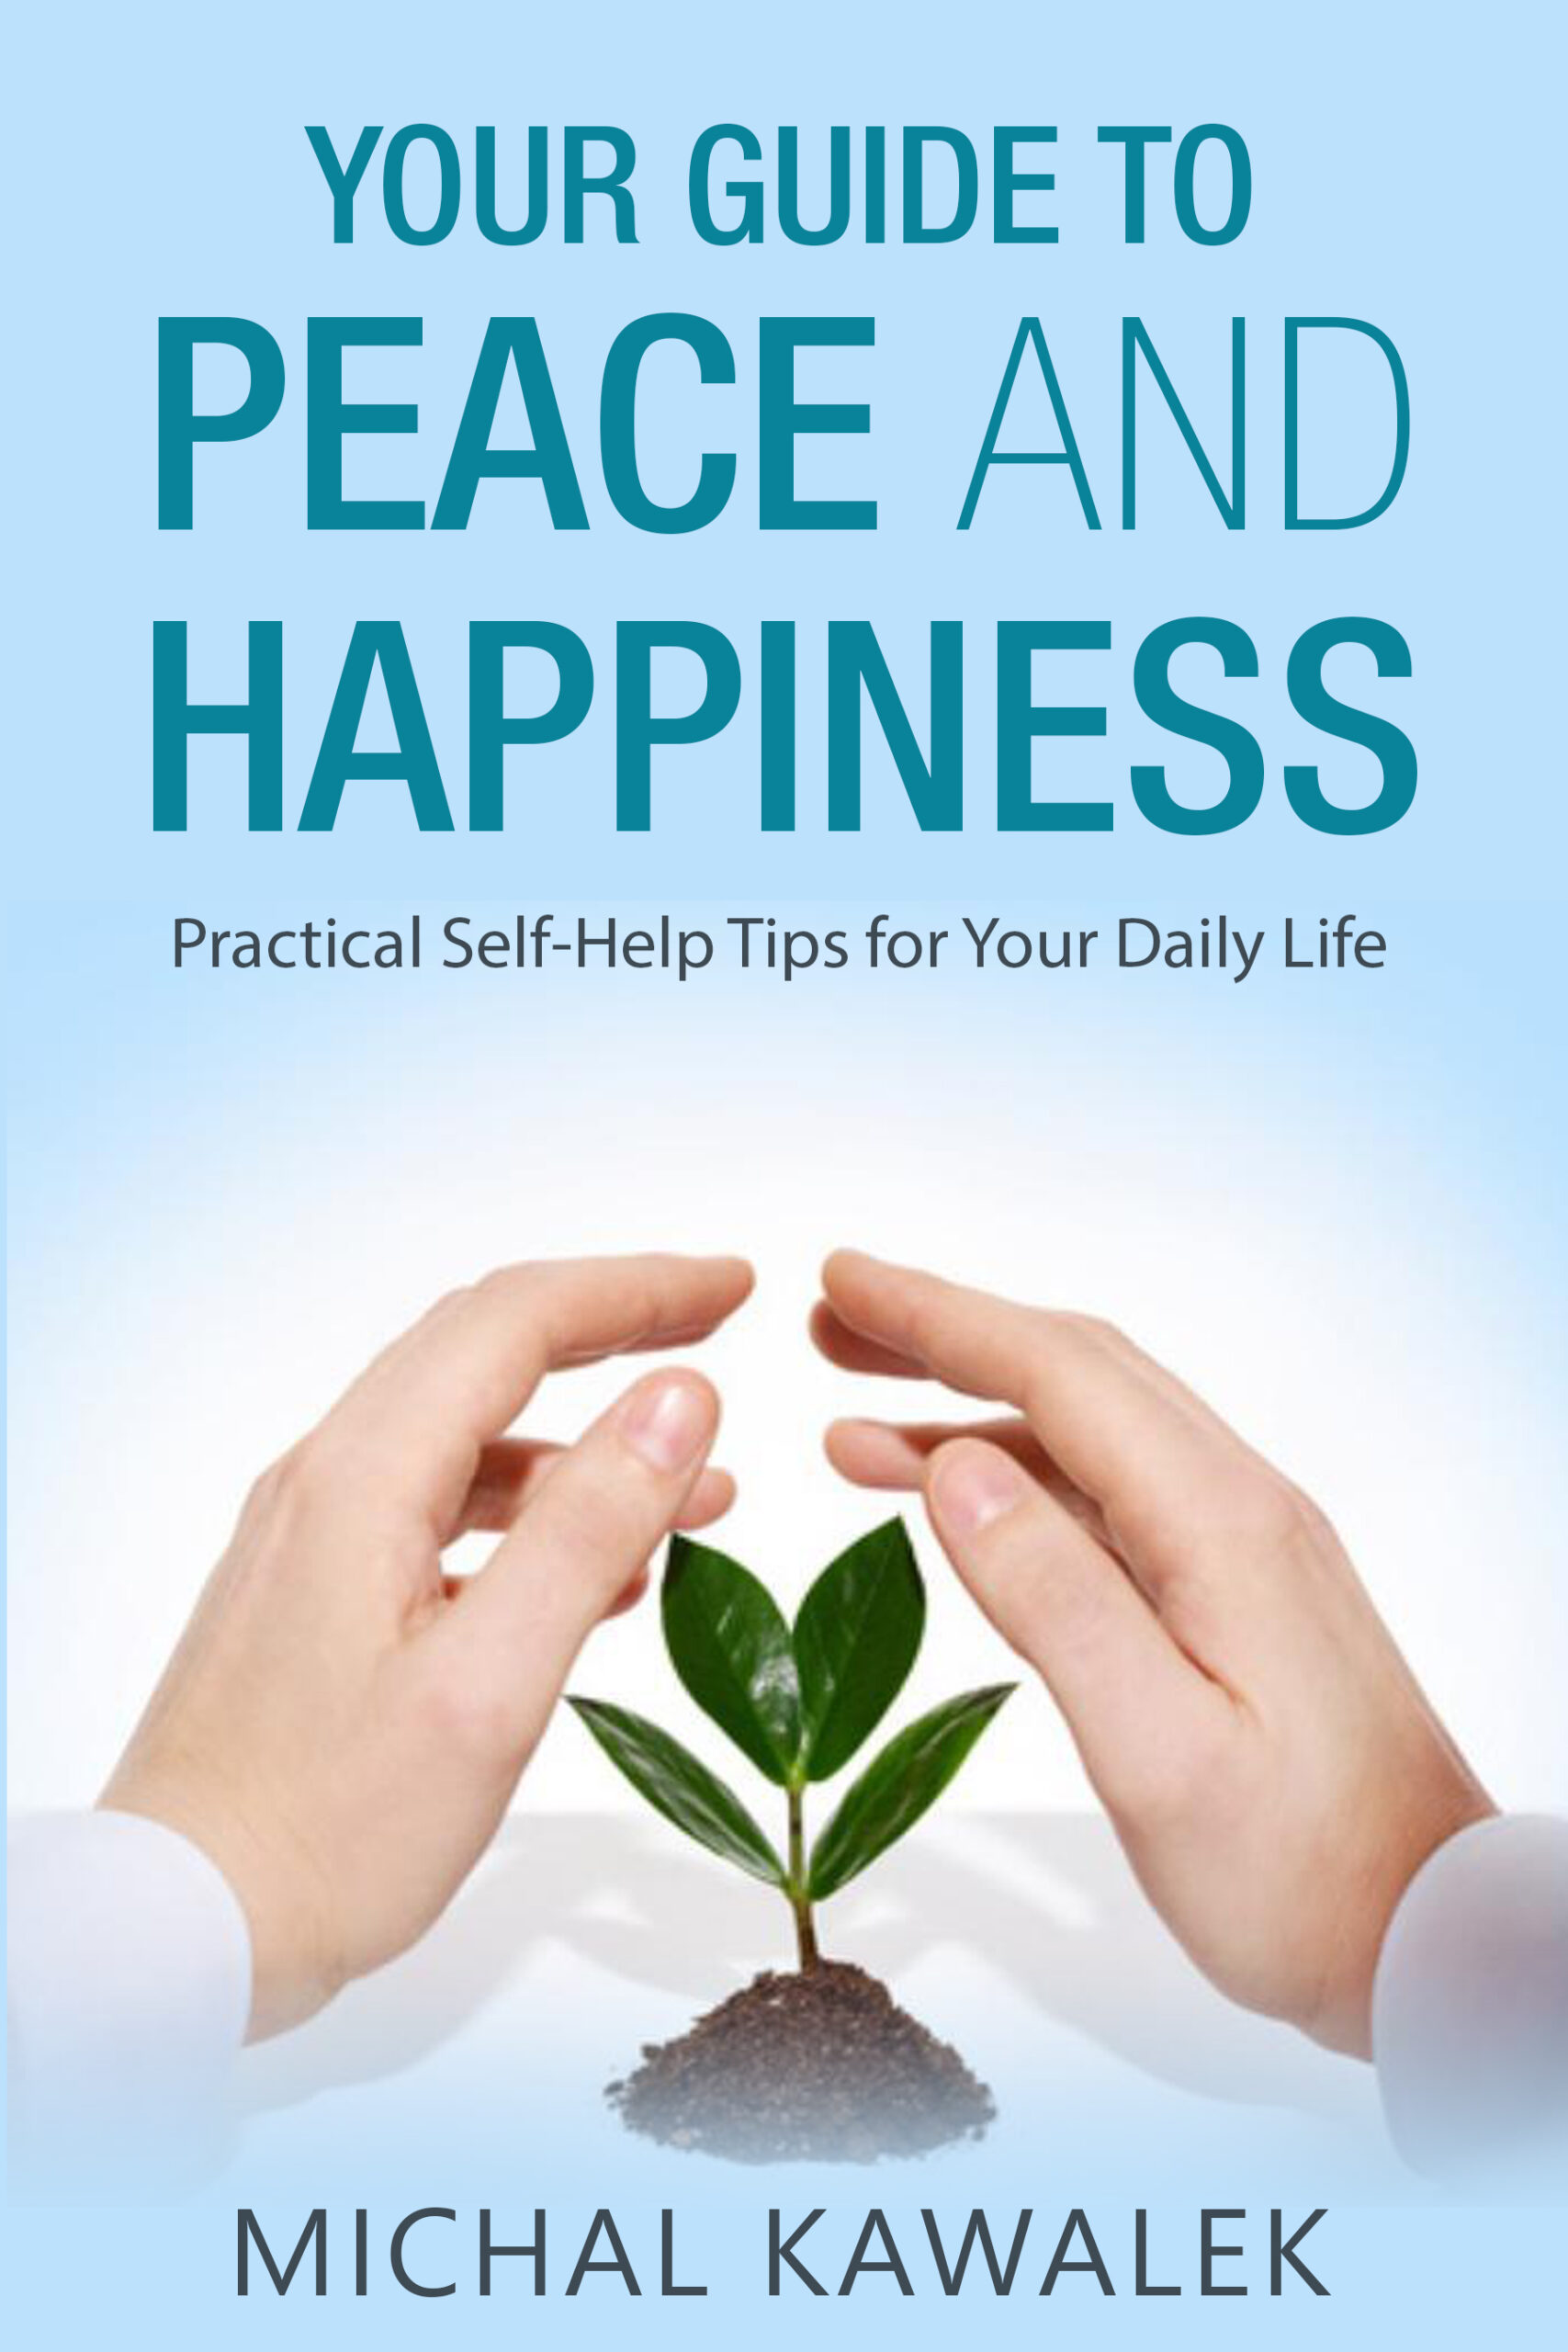 FREE: Your Guide to Peace and Happiness: Practical Self-Help Tips for Your Daily Life by Michal Kawalek